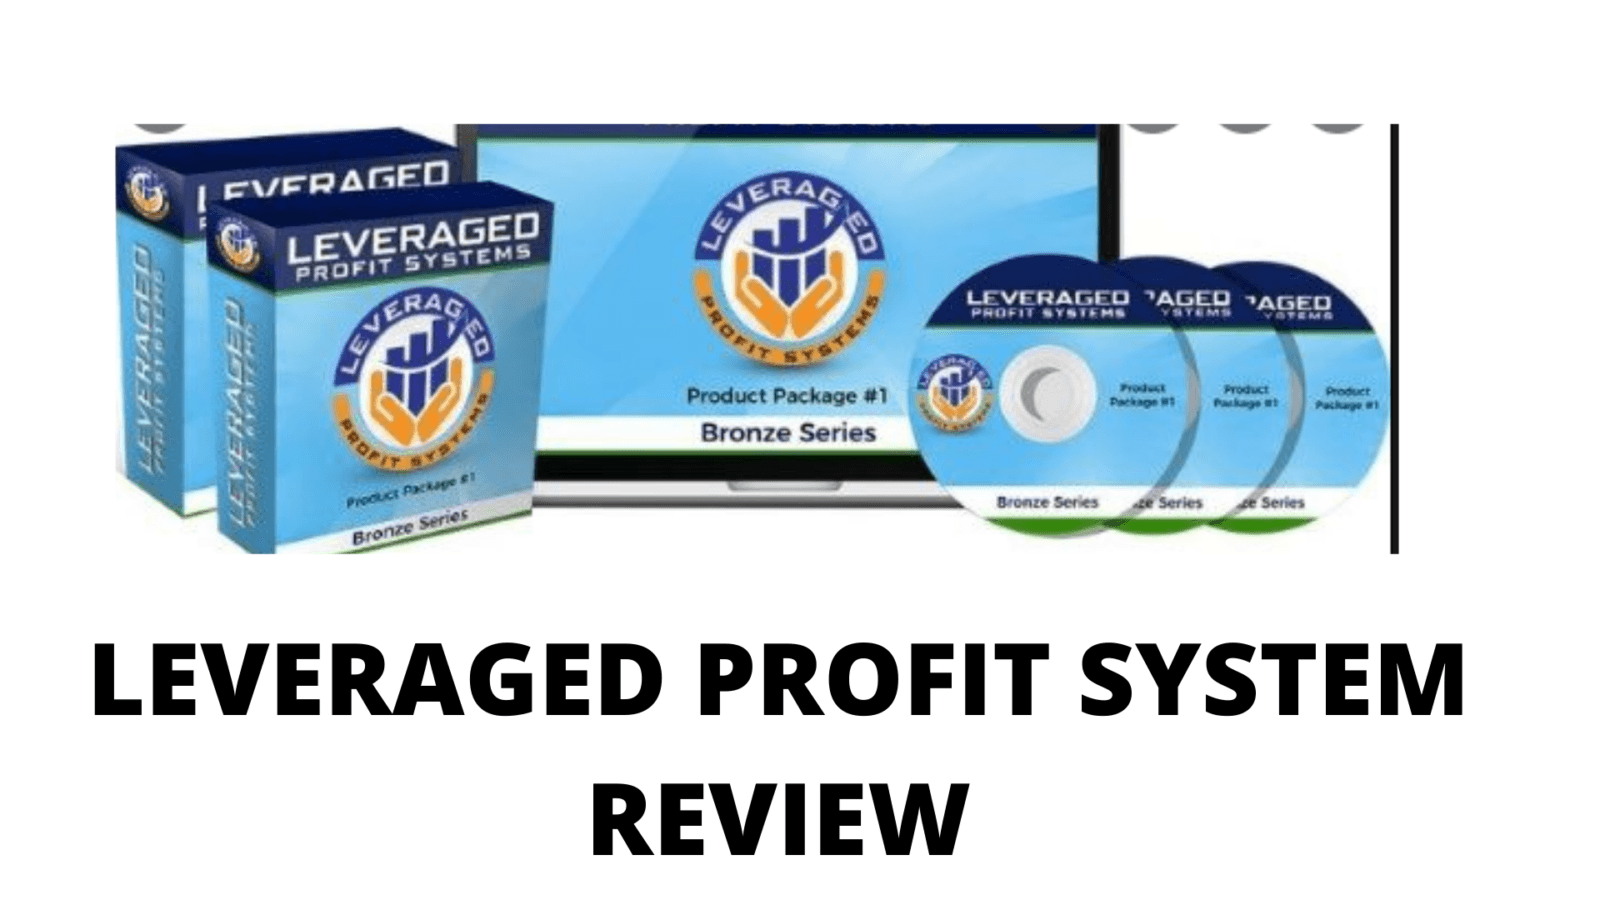 Leveraged Profit Systems Review